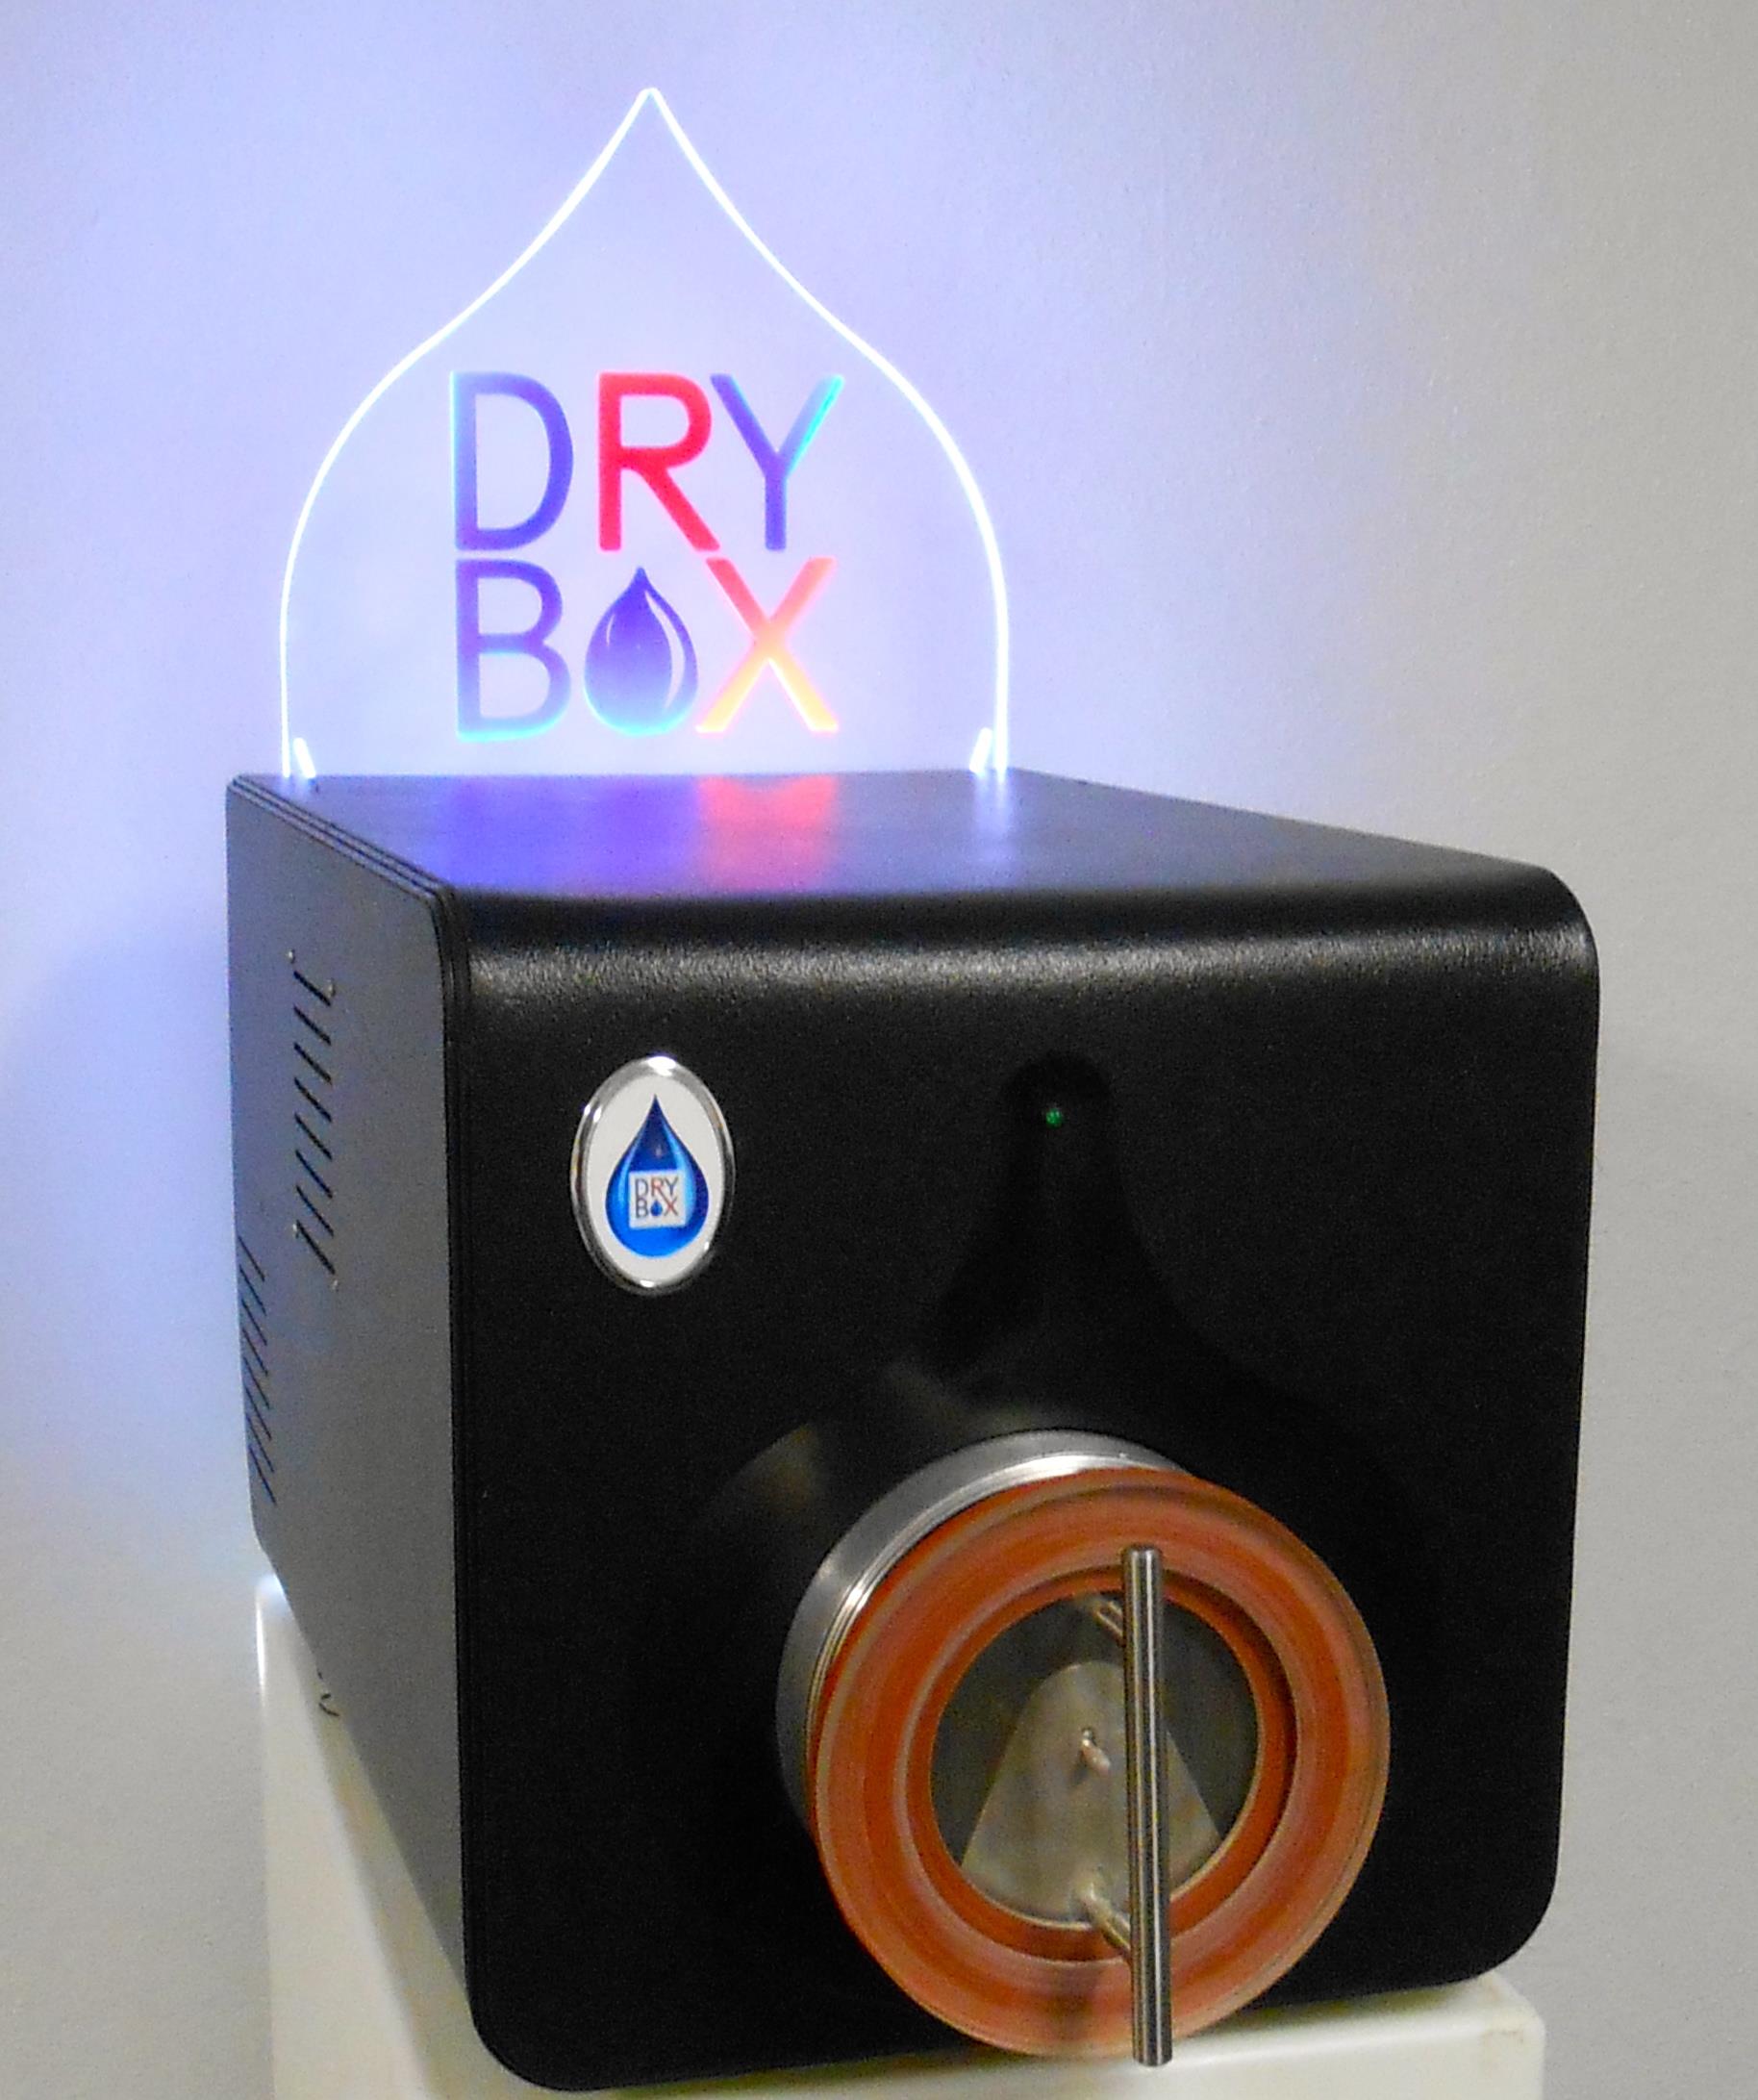 DryBox Rescue aims to absorb frustration from water-damaged phones